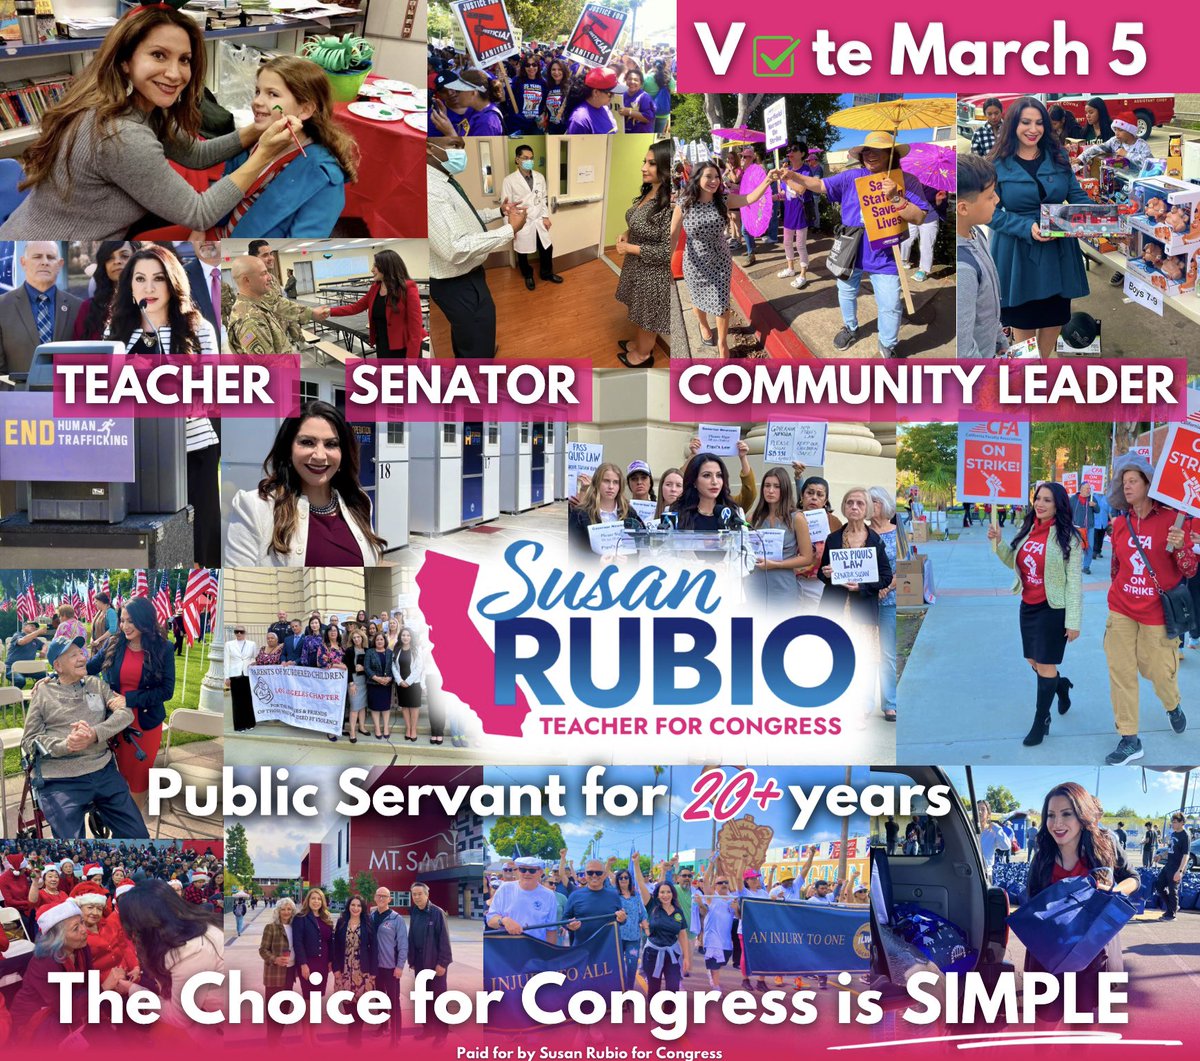 20+ years serving #SGV as a #teacher, #councilmember & #senator. Now, I'm running for Congress #CA31 to fight for #affordability, #homelessness, #familyprotection, #education & #climatechange. Let's bring our voices to D.C. Together, we make a difference. #CommunityFirst